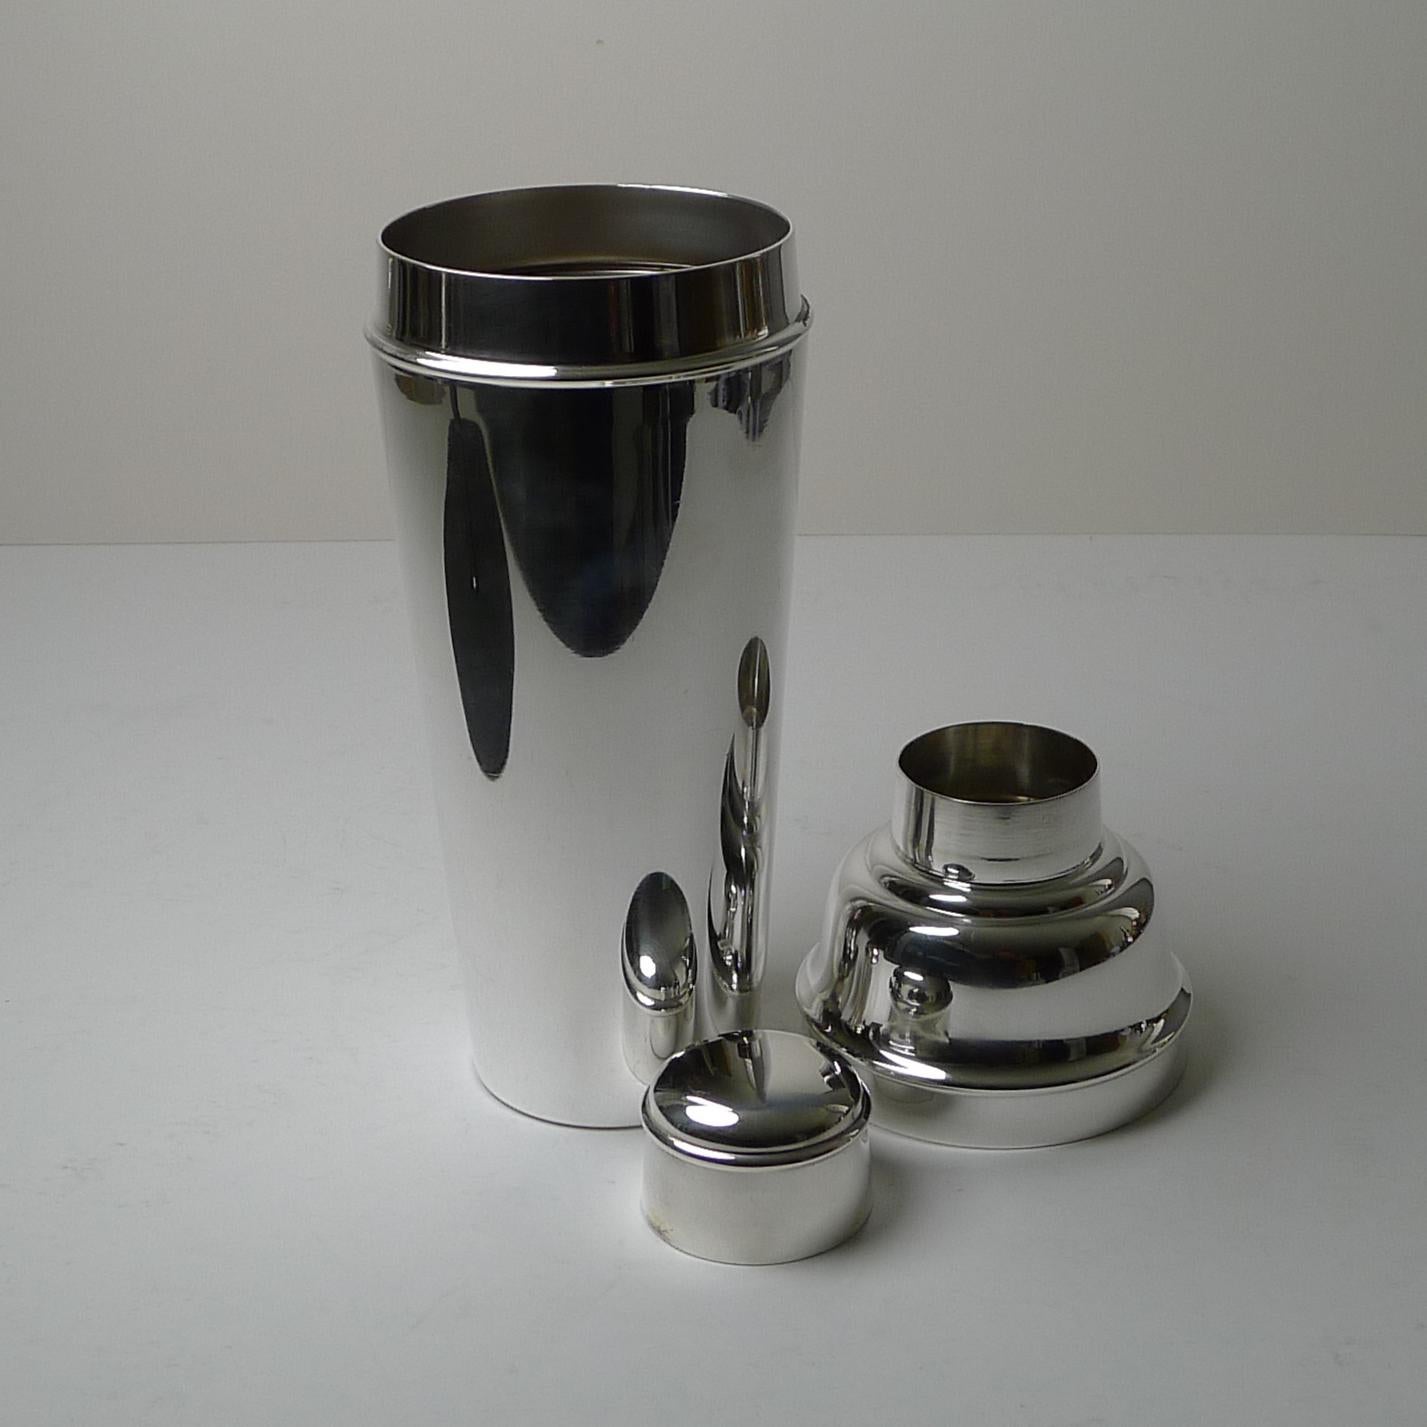 Large 1 1/2 Pint Art Deco Cocktail Shaker by Mappin & Webb For Sale 4